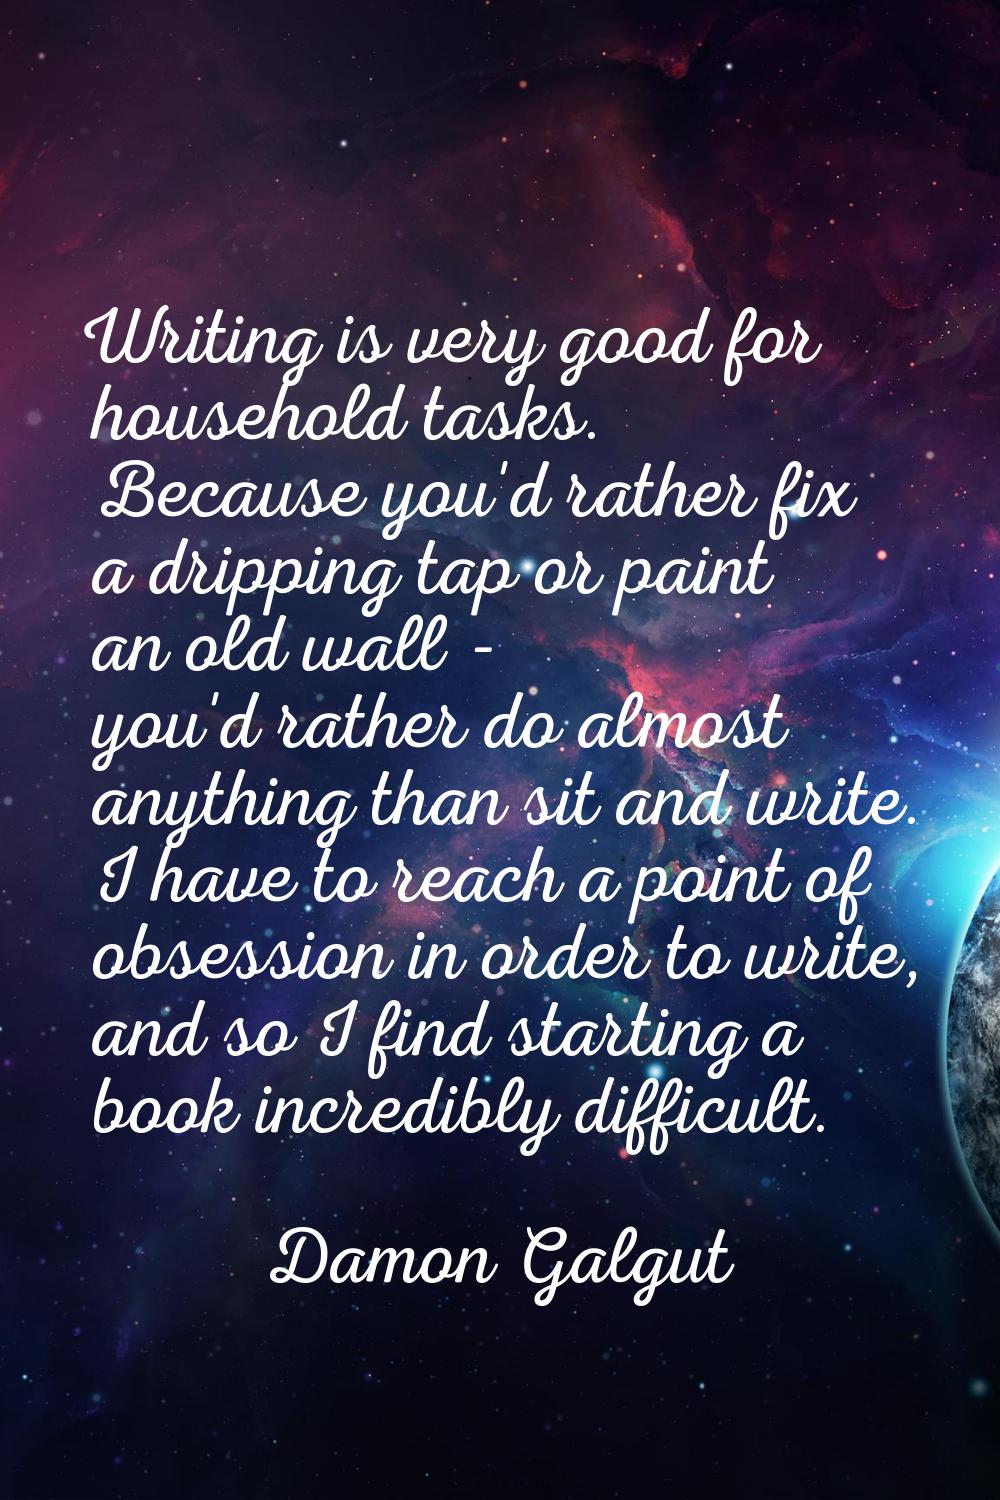 Writing is very good for household tasks. Because you'd rather fix a dripping tap or paint an old w